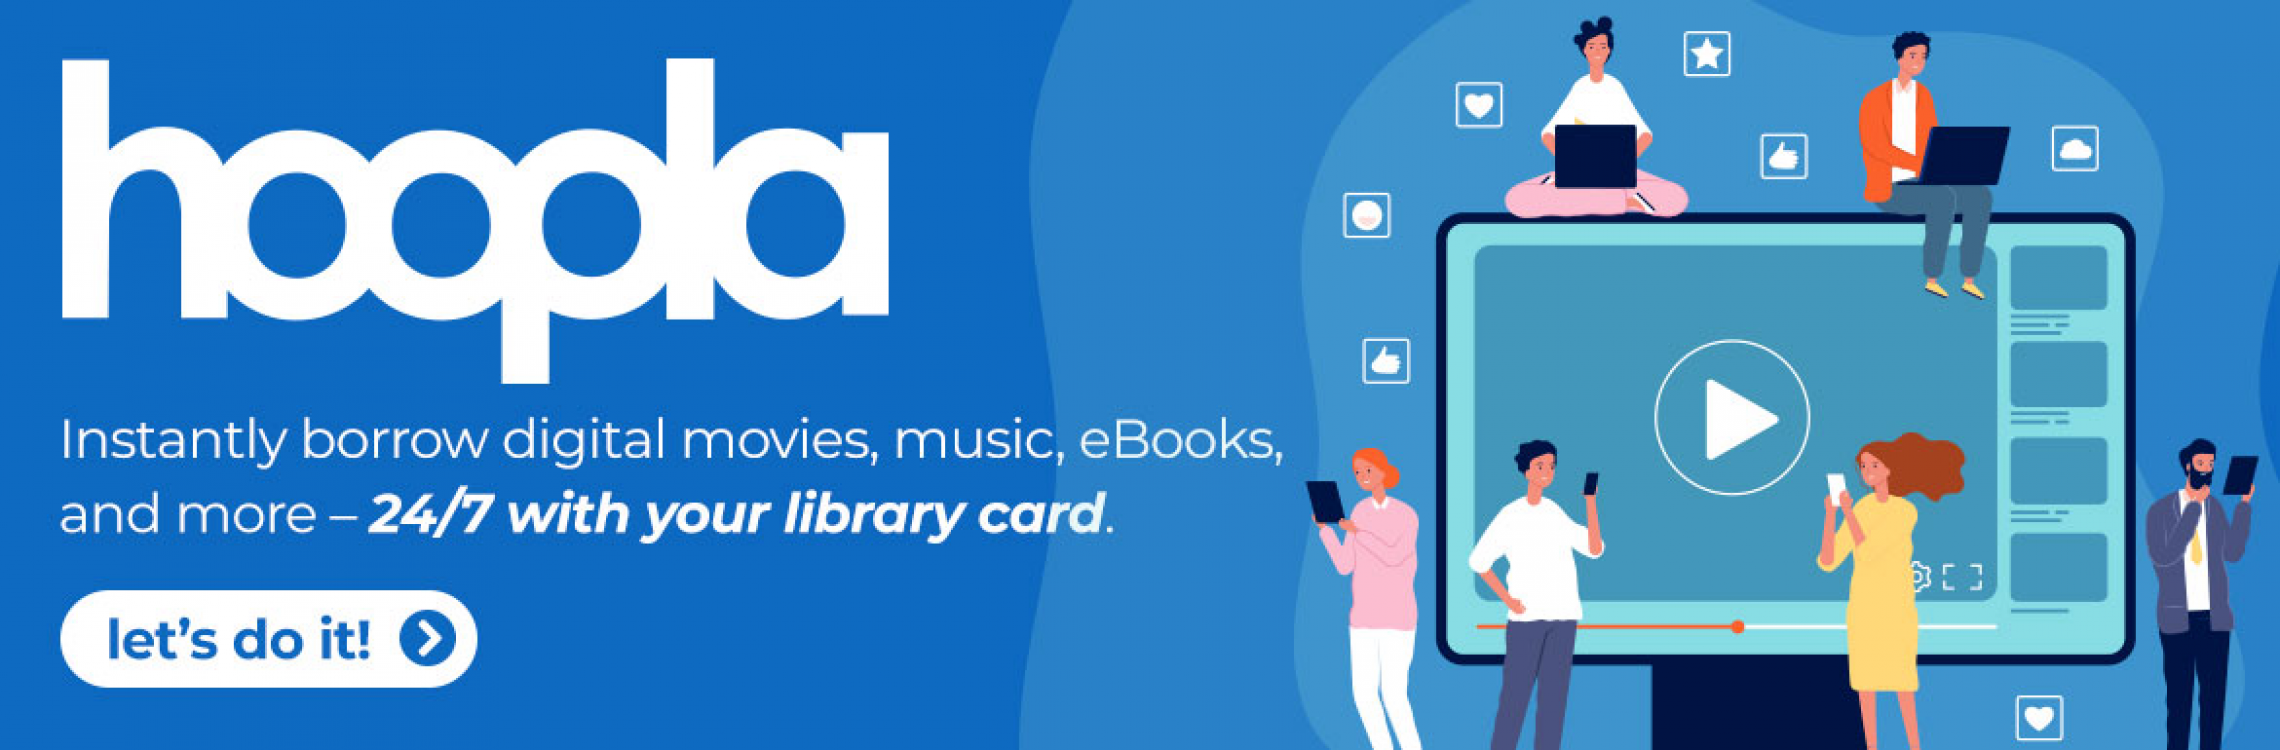 hoopla slide that reads, "Instantly borrow digital movies, music, eBooks, and more - 24/7 with your library card. let's do it!